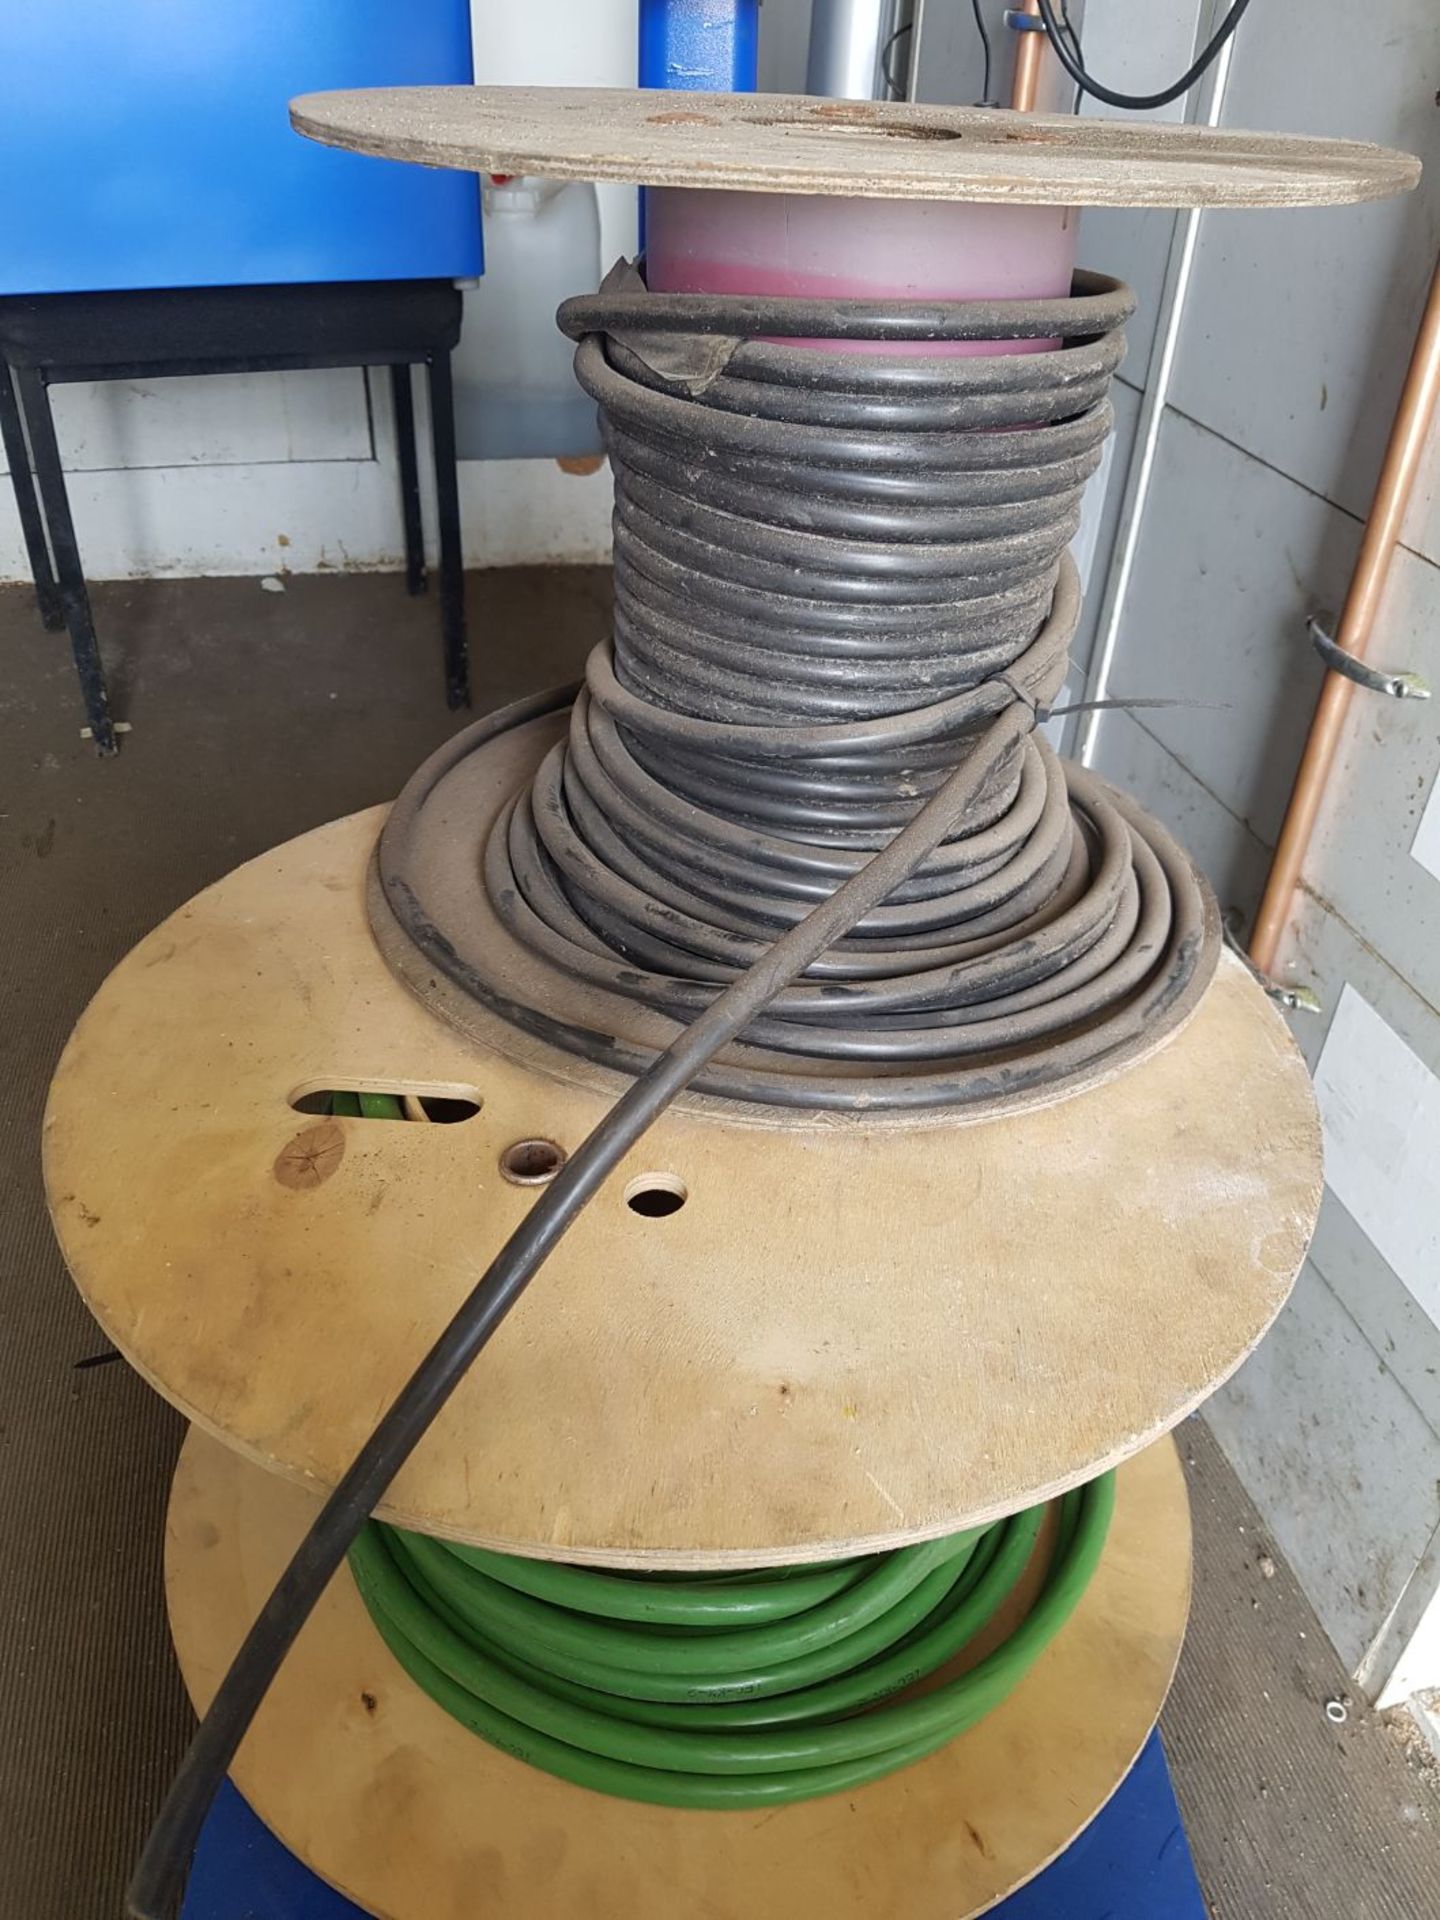 29kg of copper electrical cable - Image 2 of 8